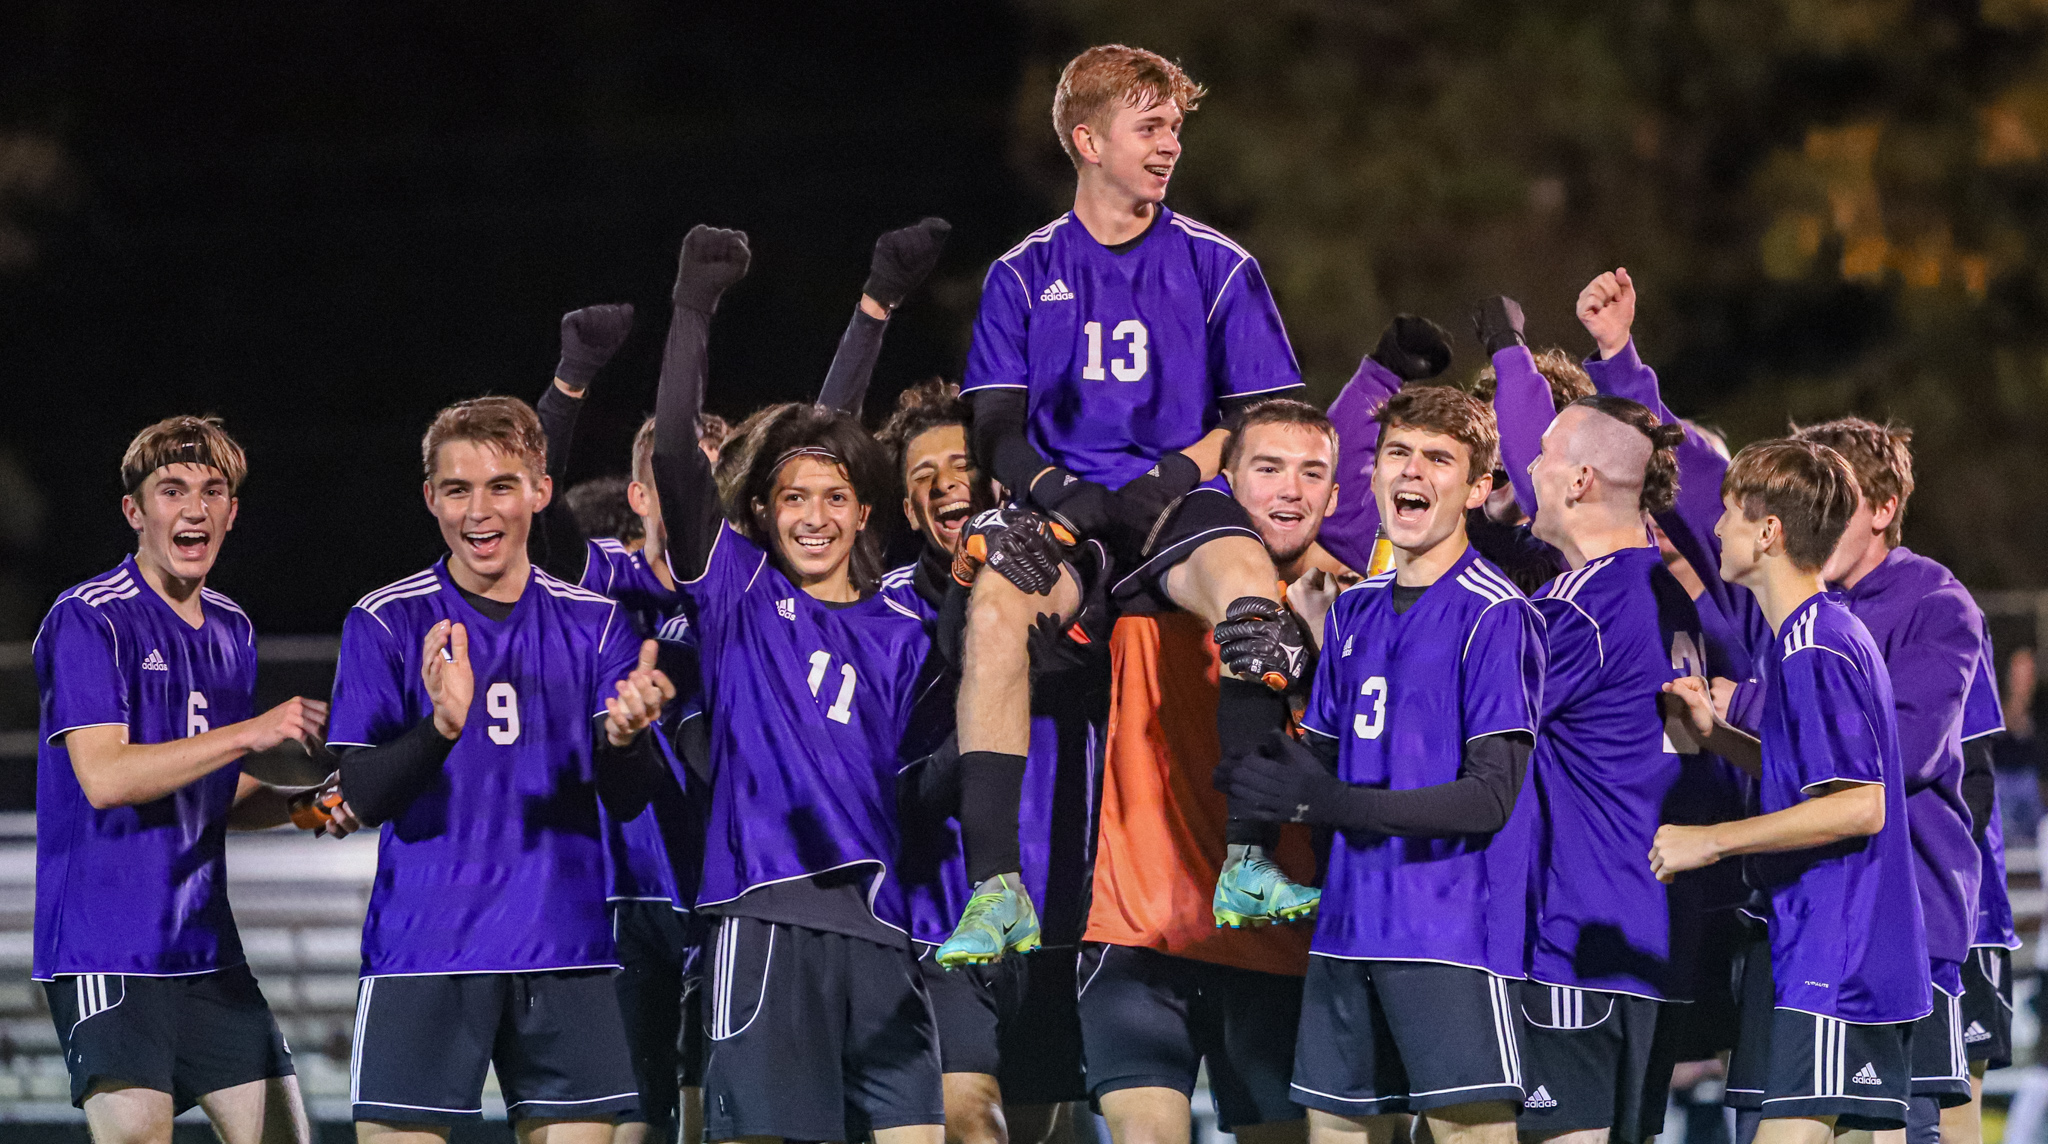 Boys Soccer: Gery’s Walk-Off Goal Sends Rosewood Into The Fourth Round (PHOTO GALLERY)